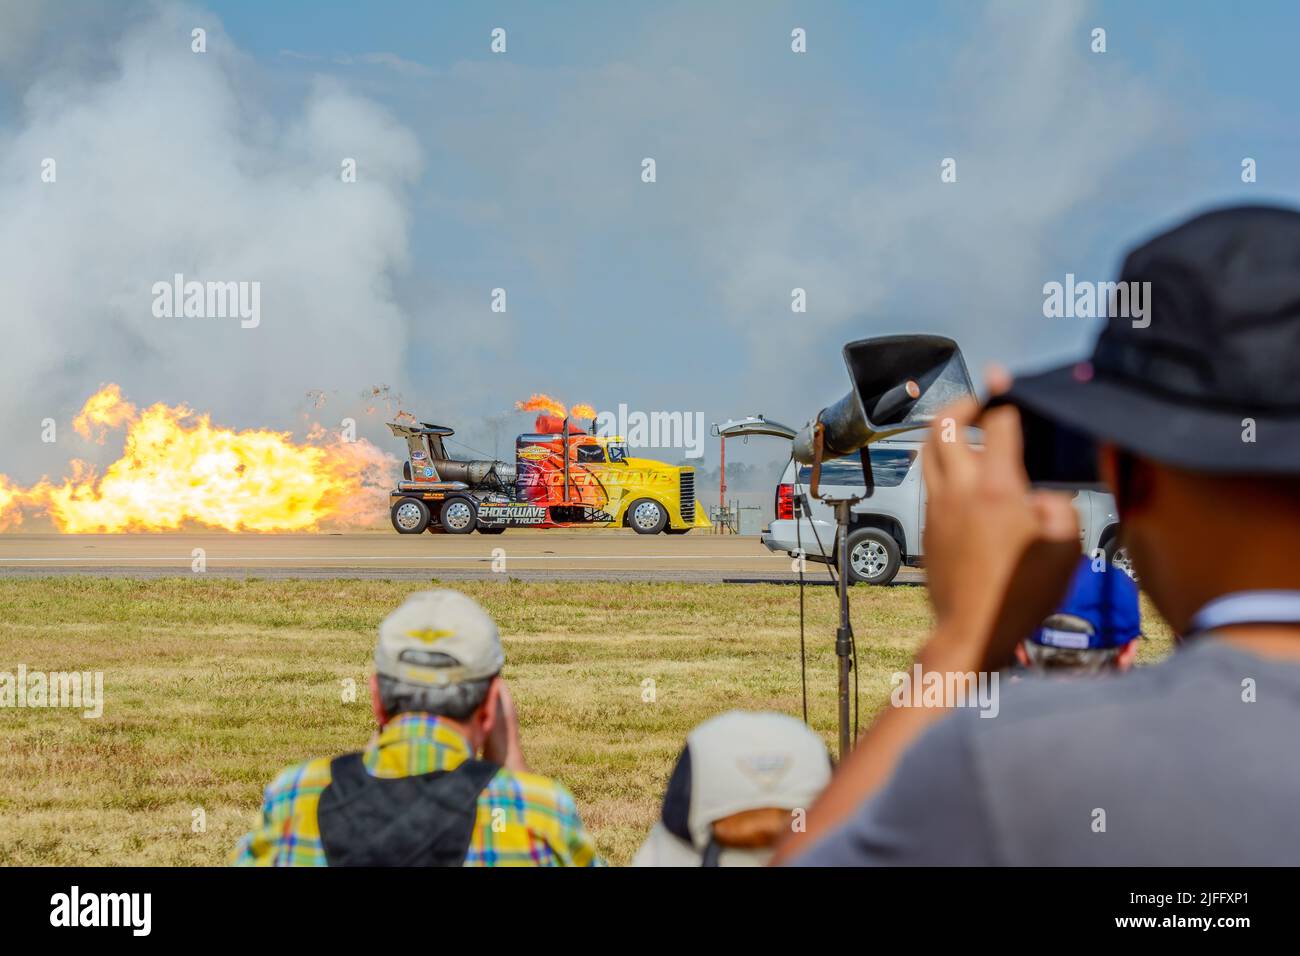 Shockwave, driven by Chris Darnell at Airshow in Fort Worth Texas, 2015 Stock Photo